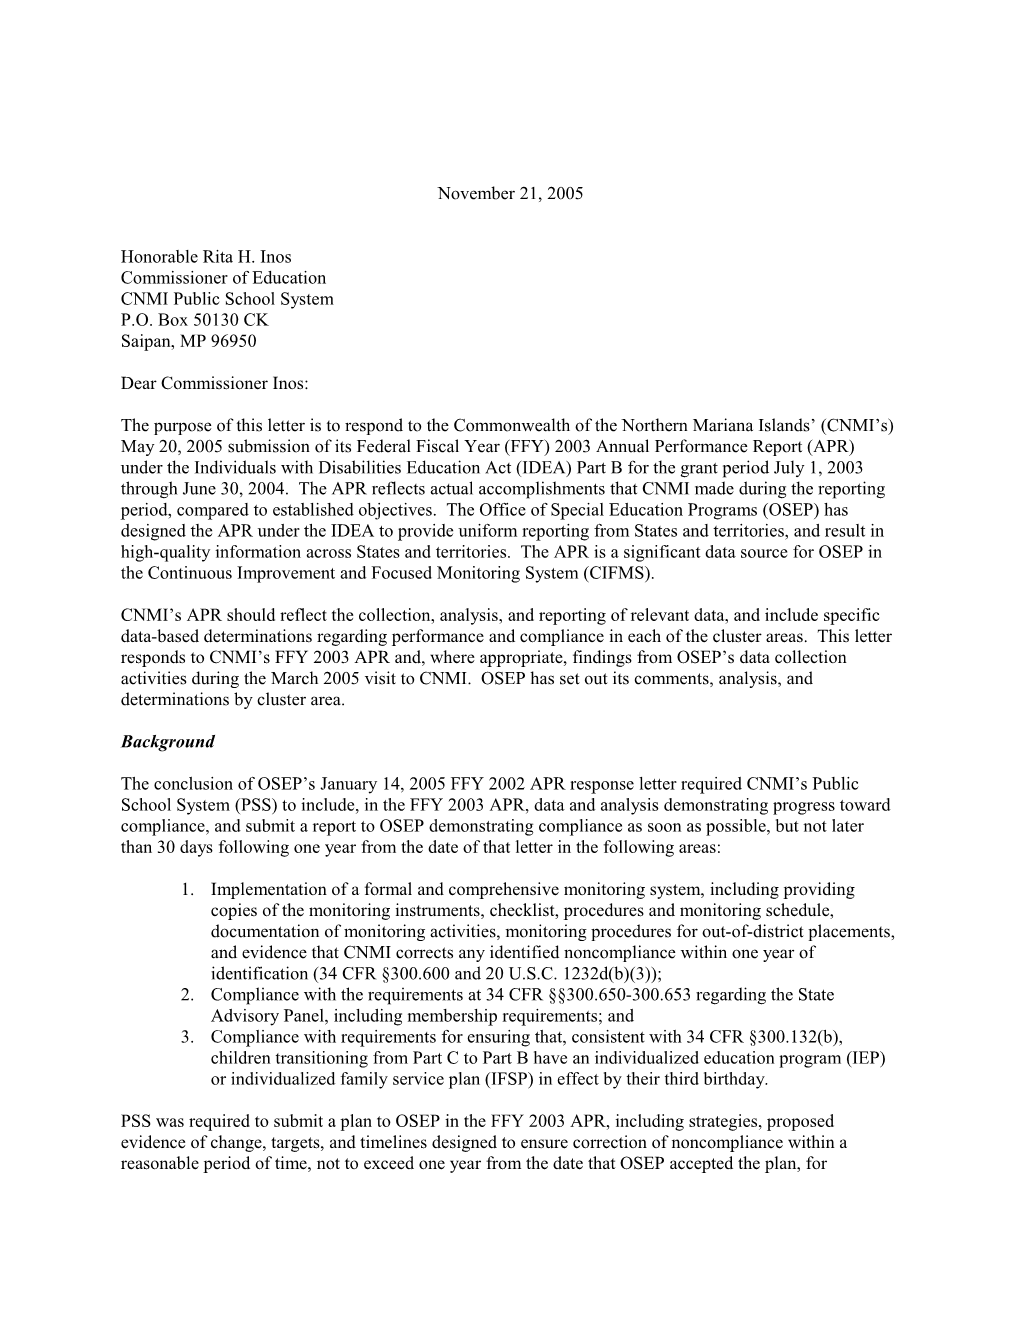 Northern Mariana Islands Part B Letter for Grant Year 2003-2004 (Msword)